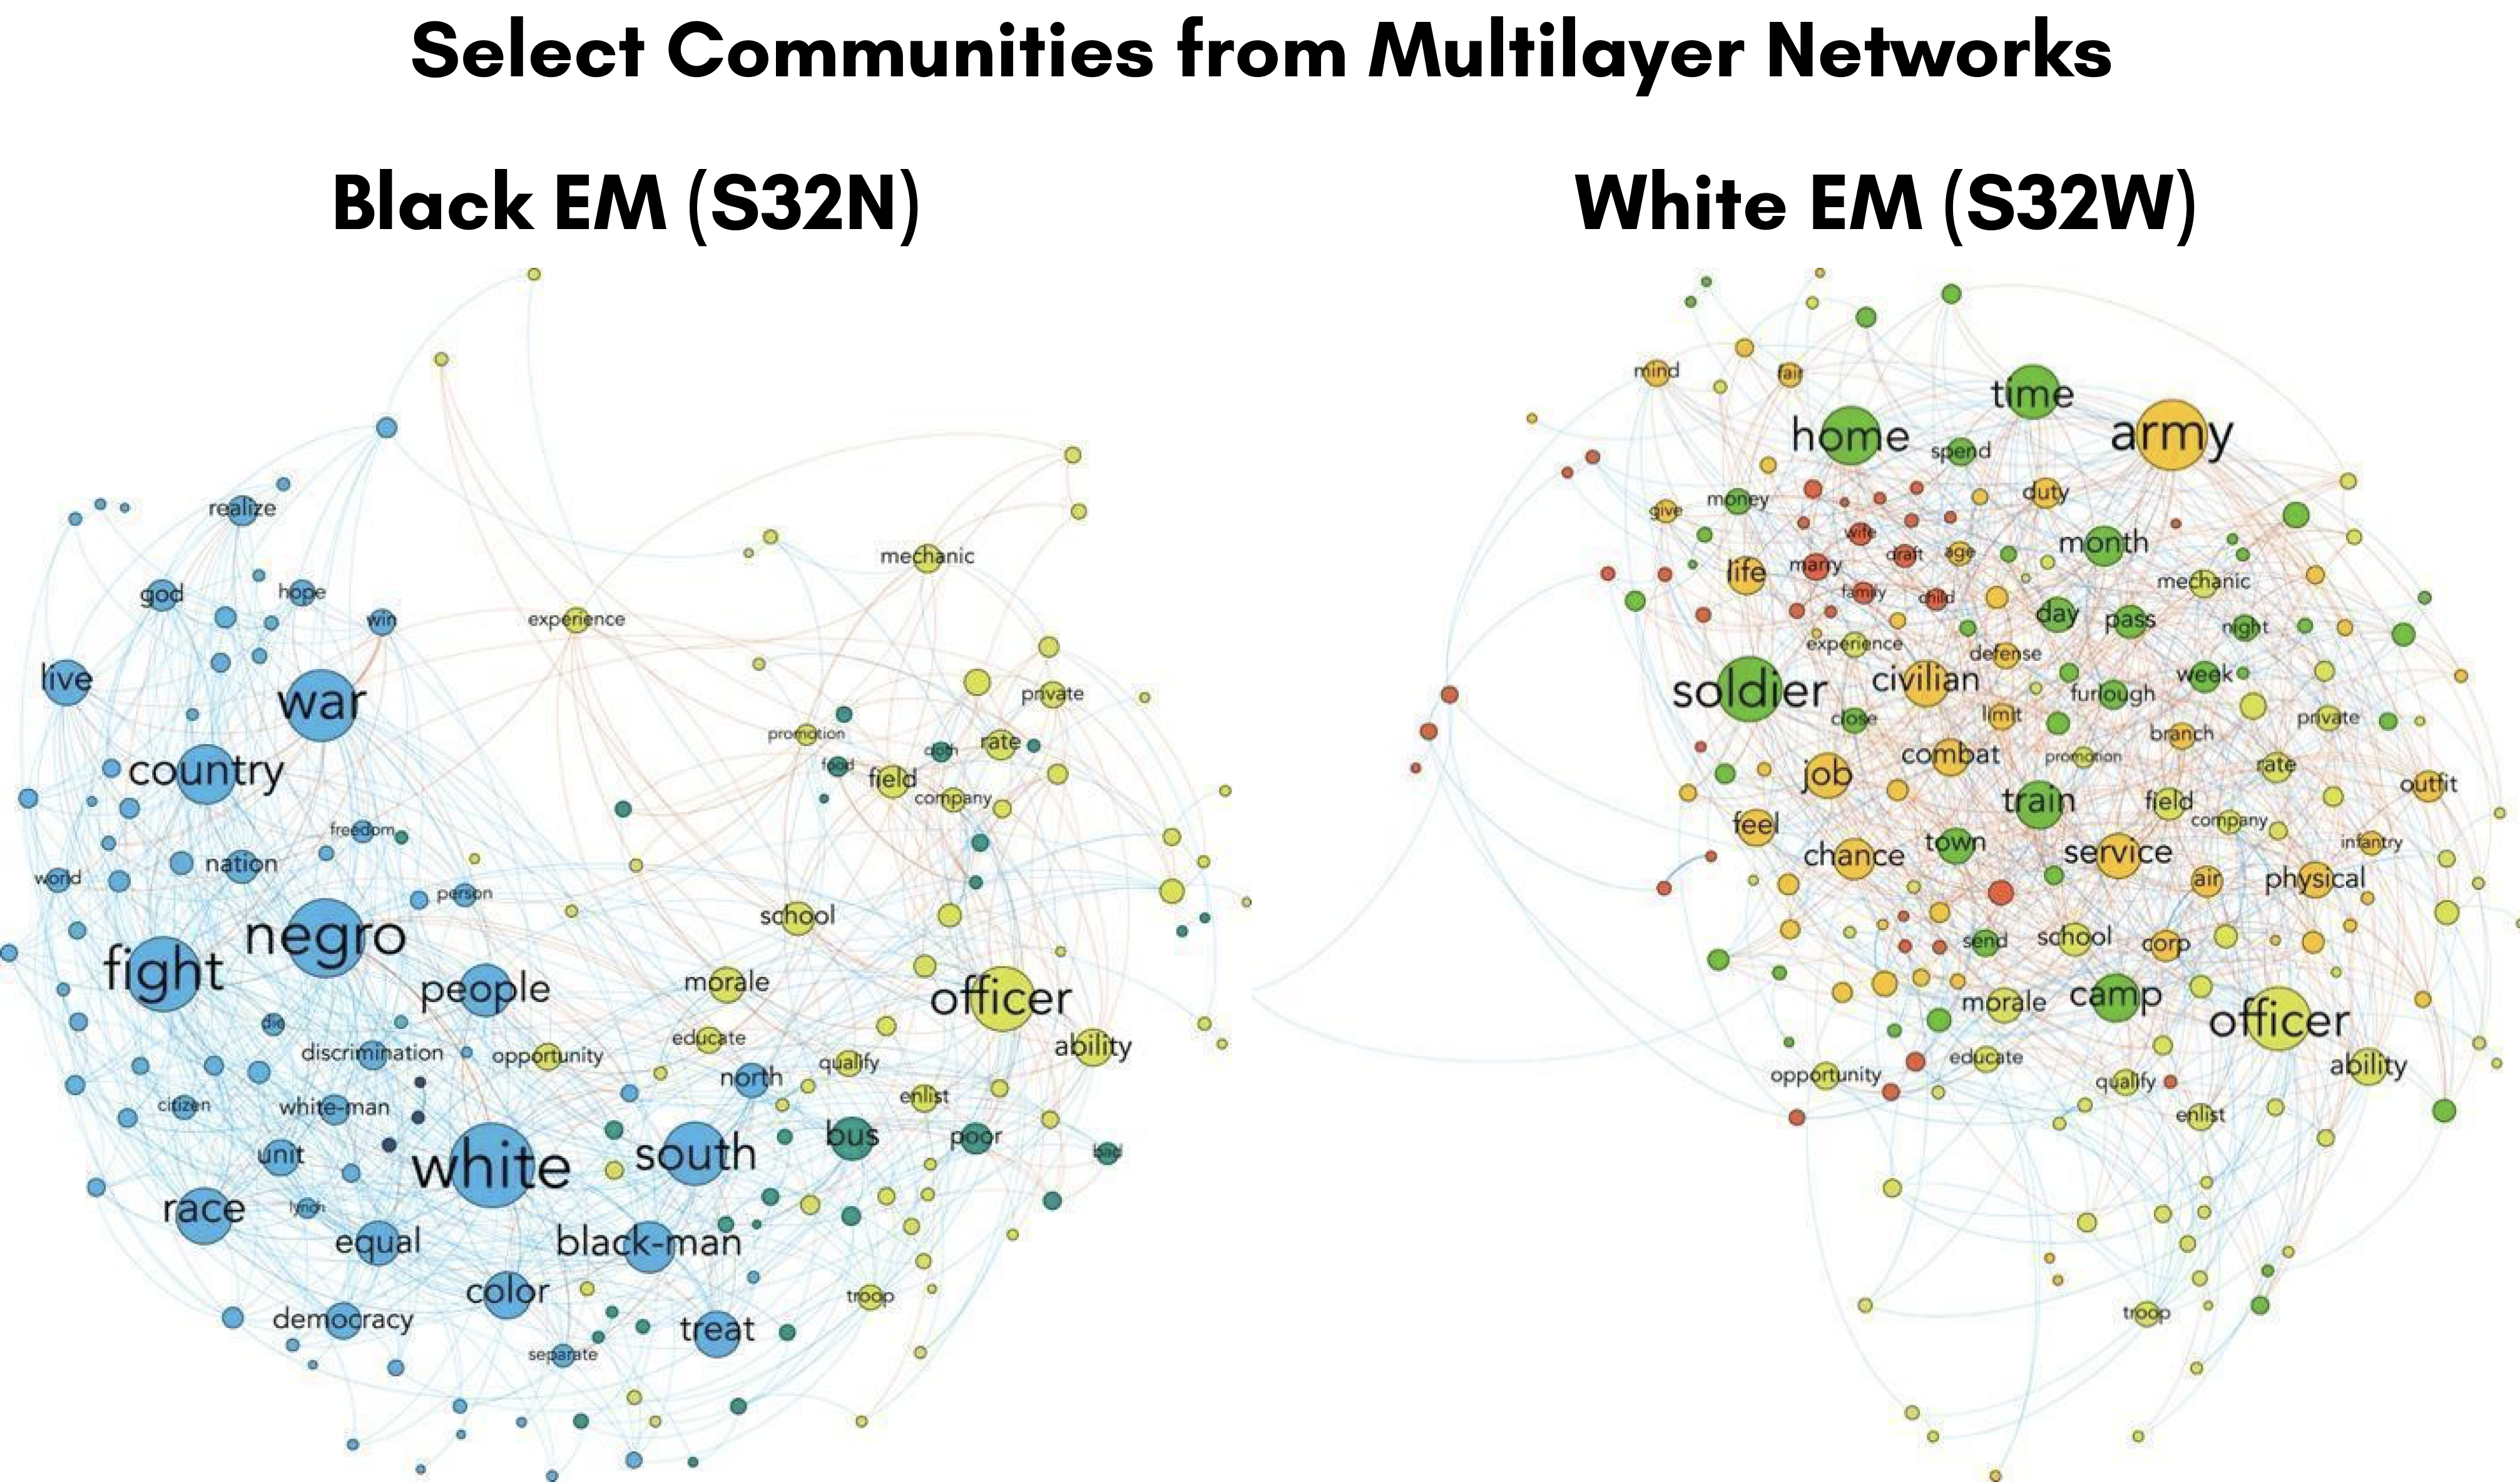 Network visualization entitled “Select Communities from Multilayer Networks.” It shows two networks graphs side by side. The network on the left shows related word communities from the S32N responses from black enlisted men, while the network on the right shows the same for S32W responses from white enlisted men. The most promote community in the S32N graph is blue, representing words like negro, fight, county, war, people, white, south, race, race, color, south and black-man. The most promote communities in the S32W graph are green (with terms like home, solider, time, train, camps) and yellow (with terms like army, civilian, combat, job, service, life, and physical). Both graphs also have prominent chartreuse communities, with terms like officer, ability, and morale.